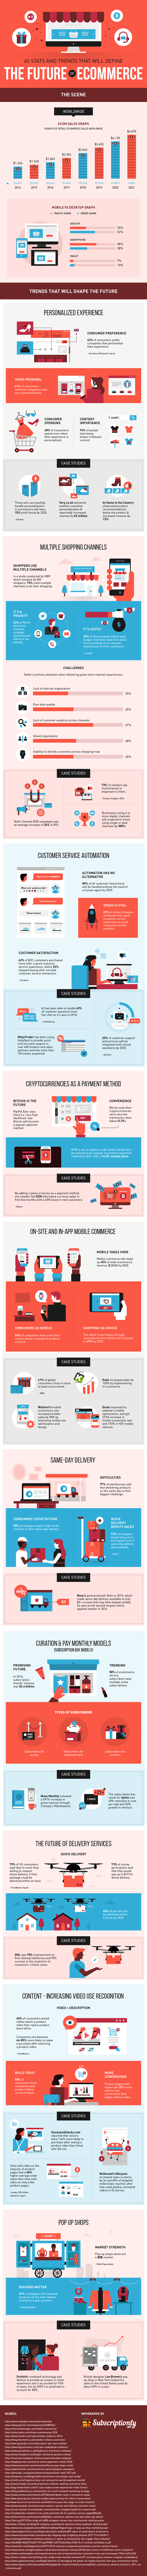 The Future of eCommerce: 60 Stats and Trends for 2019 and Beyond [Infographic]